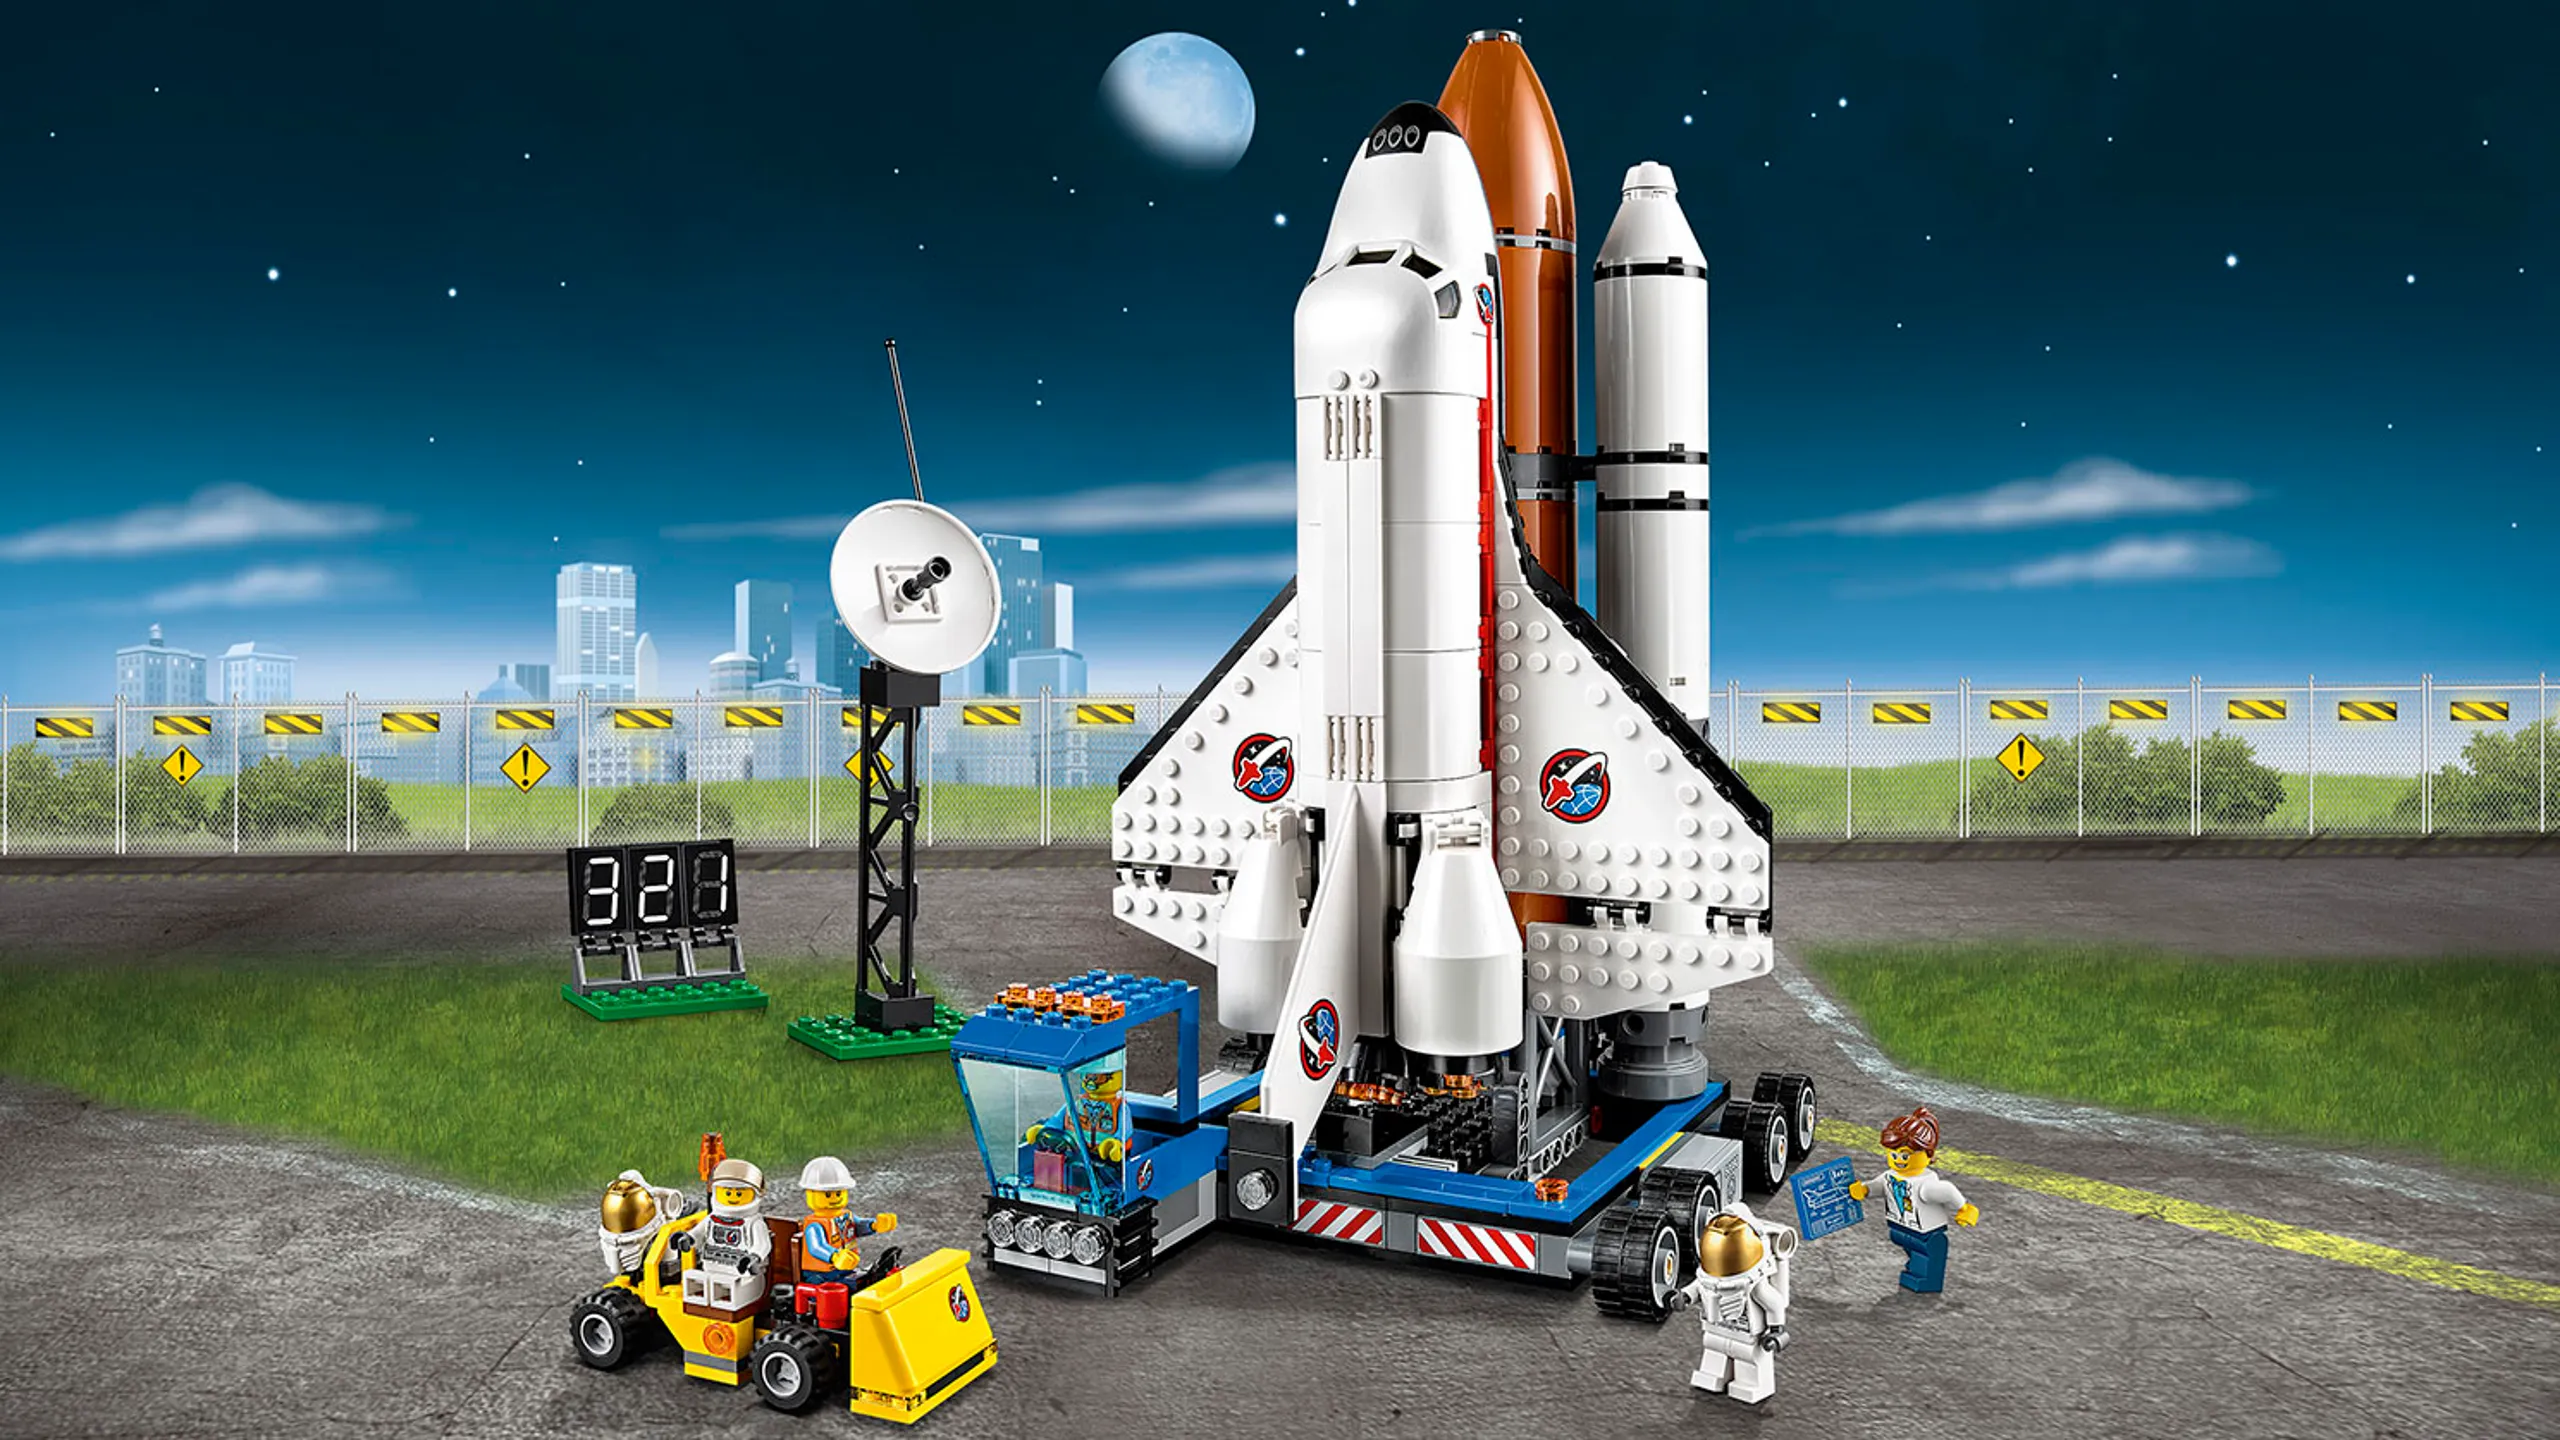 LEGO City Space shuttle, ground crew and astronaut minifigures - Spaceport 60080